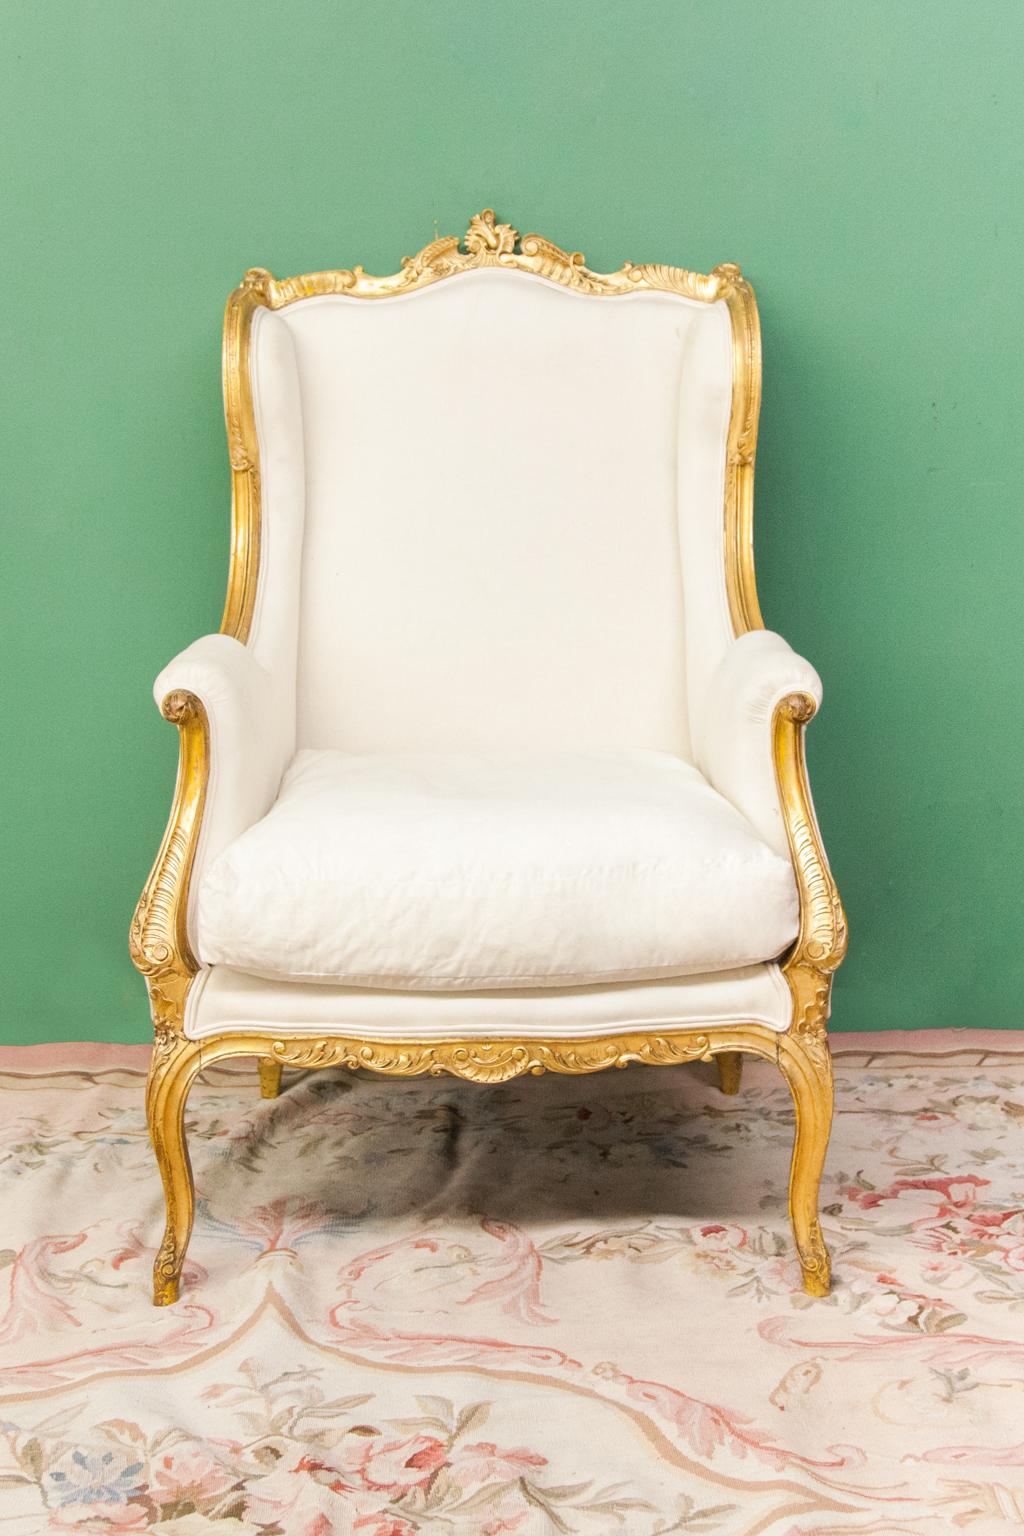 19th Century French Gilt Wing Chair